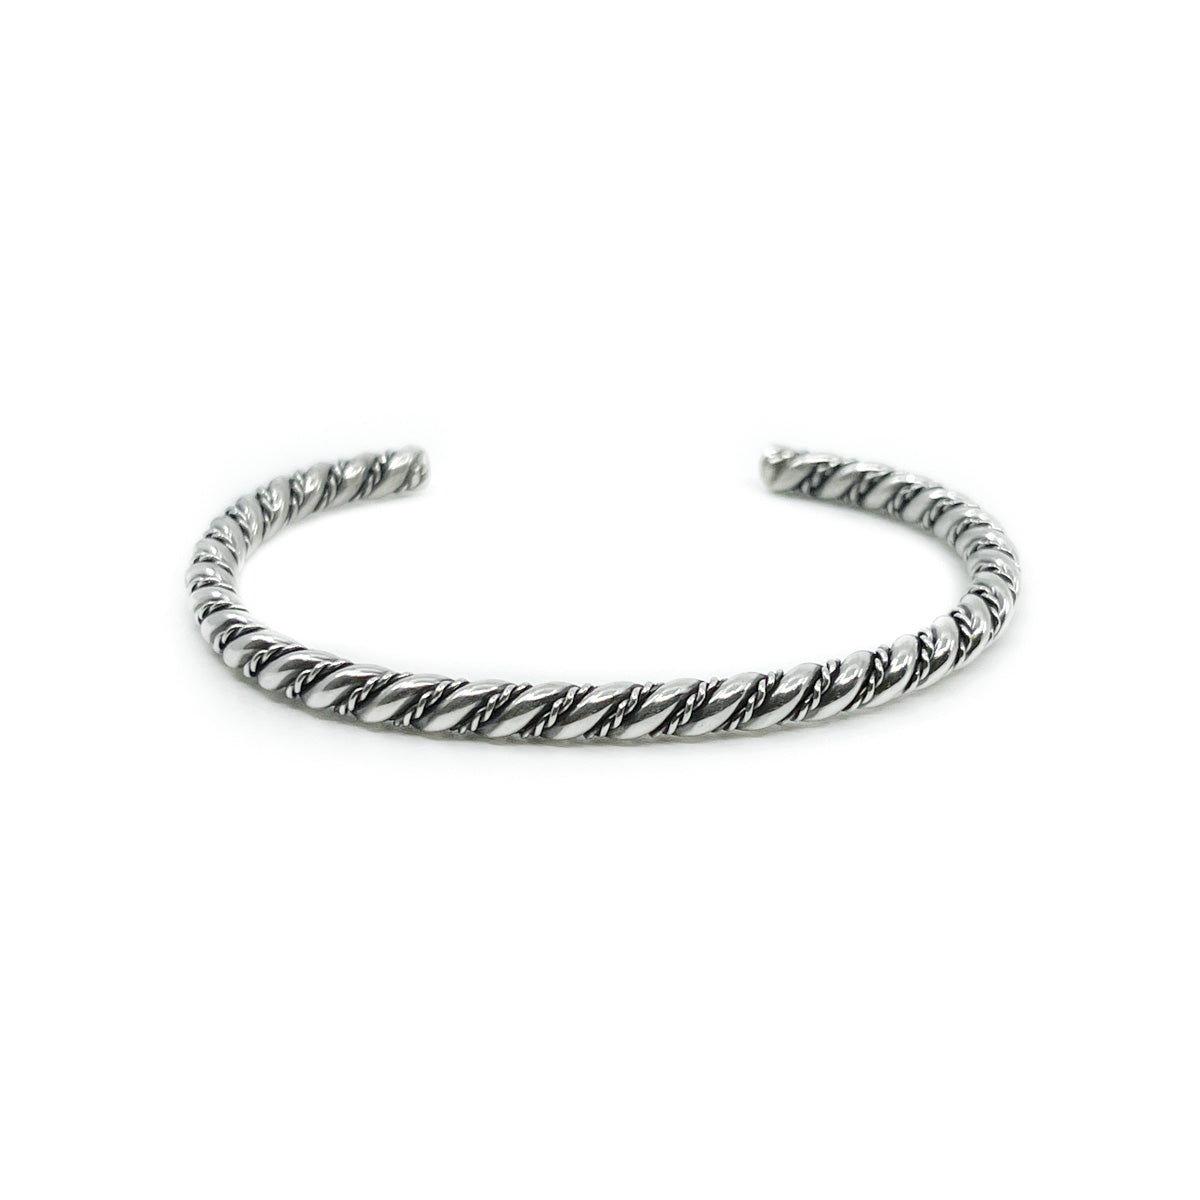 Sterling silver twist bracelet, heavy gauge silver By Diné silversmith, Carlyn Tahe Alternating heavy gauge silver wire with narrow silver wire Fits small to average wrists, 6 inches around plus 1 inch opening Somewhat flexible, great for stacking multiples!  *All sales on jewelry are final. No returns or exchanges